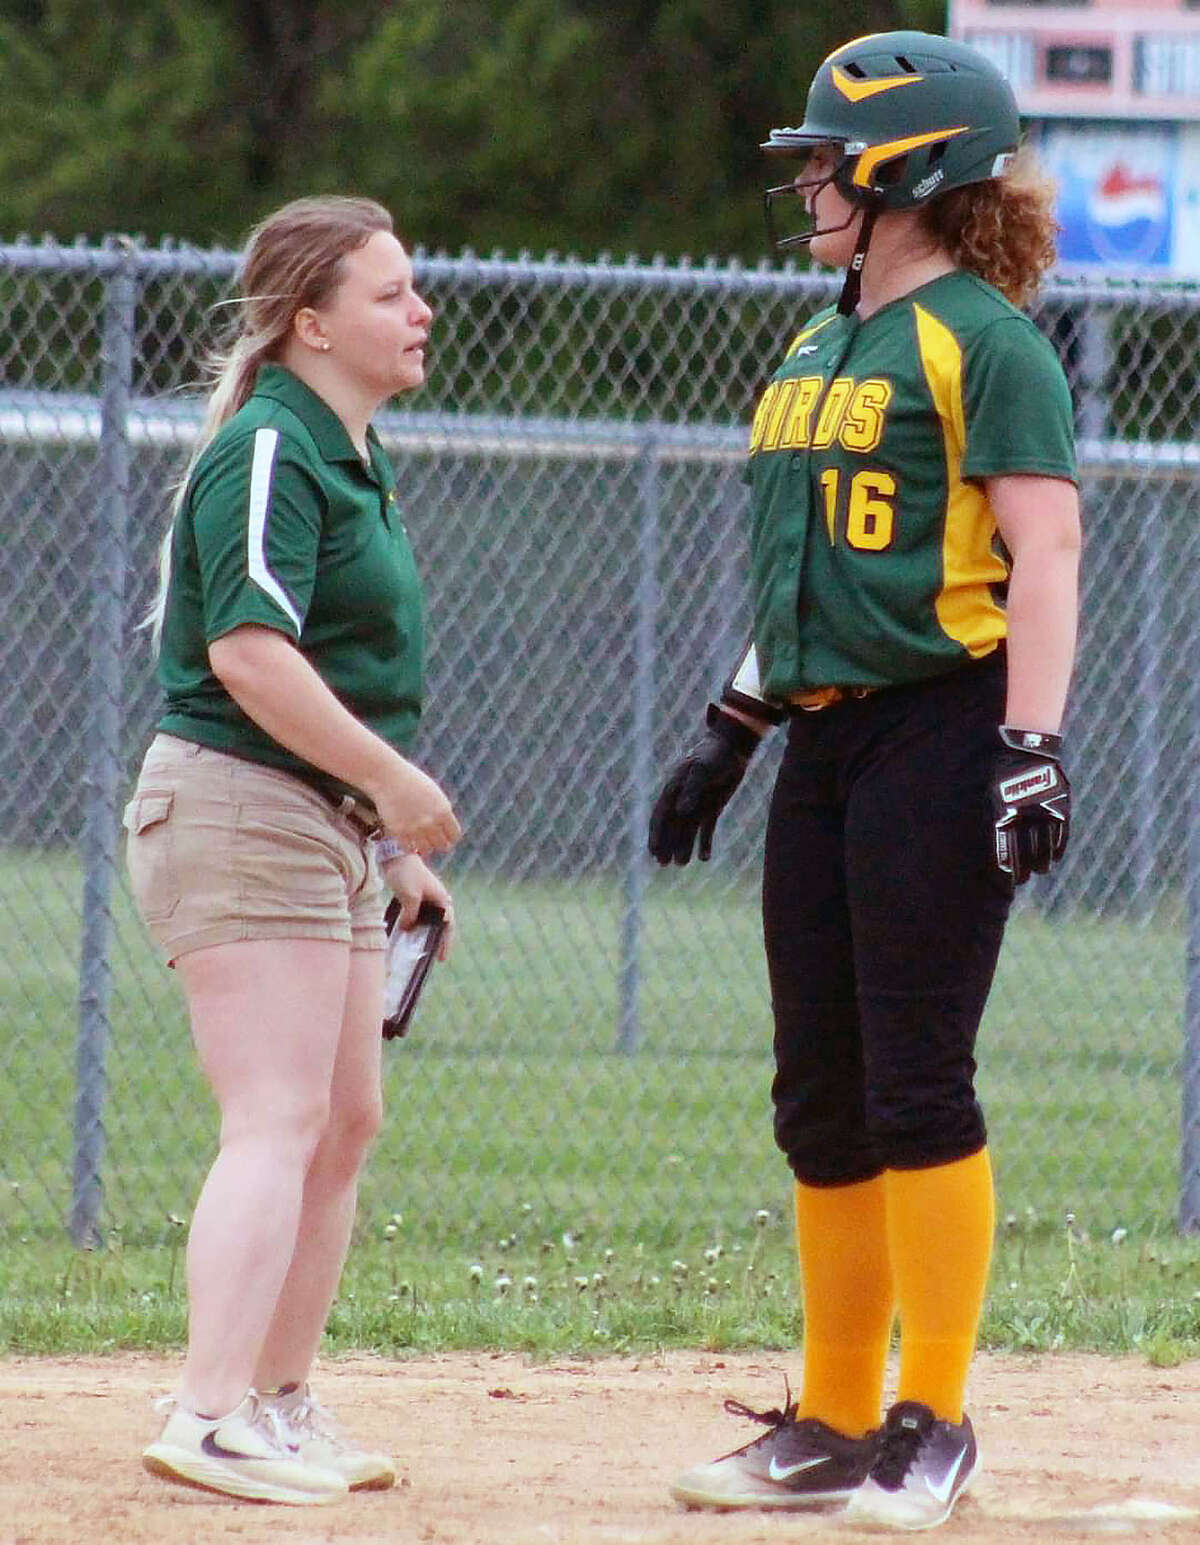 Coach Amanda Edwards, left, talks with Southwestern player Whitney Keith during a 2019 game. Edwards, who was assistant coach six seasons, has been named the new head softball coach at Southwestern, replacing Peg Mitchell, who retired after 12 seasons.